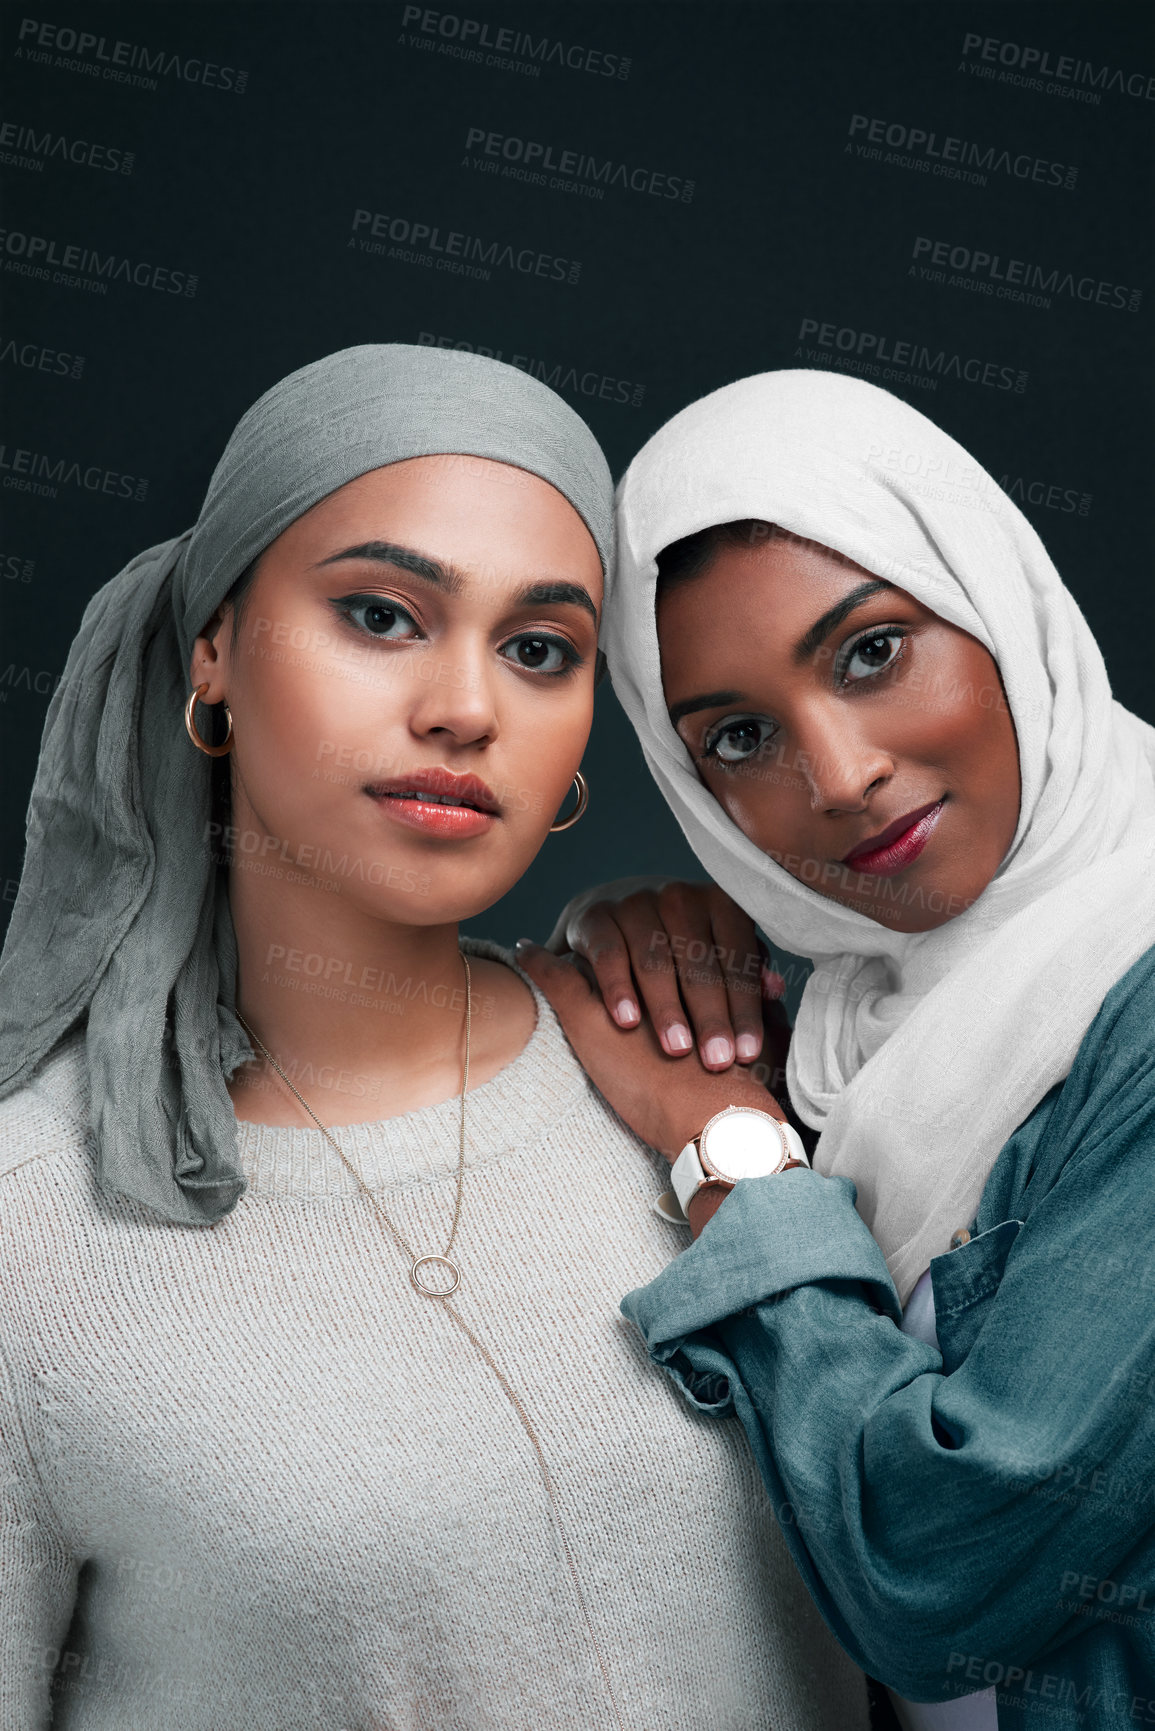 Buy stock photo Cropped shot of two attractive young women wearing hijabs and standing close together against a black background in the studio